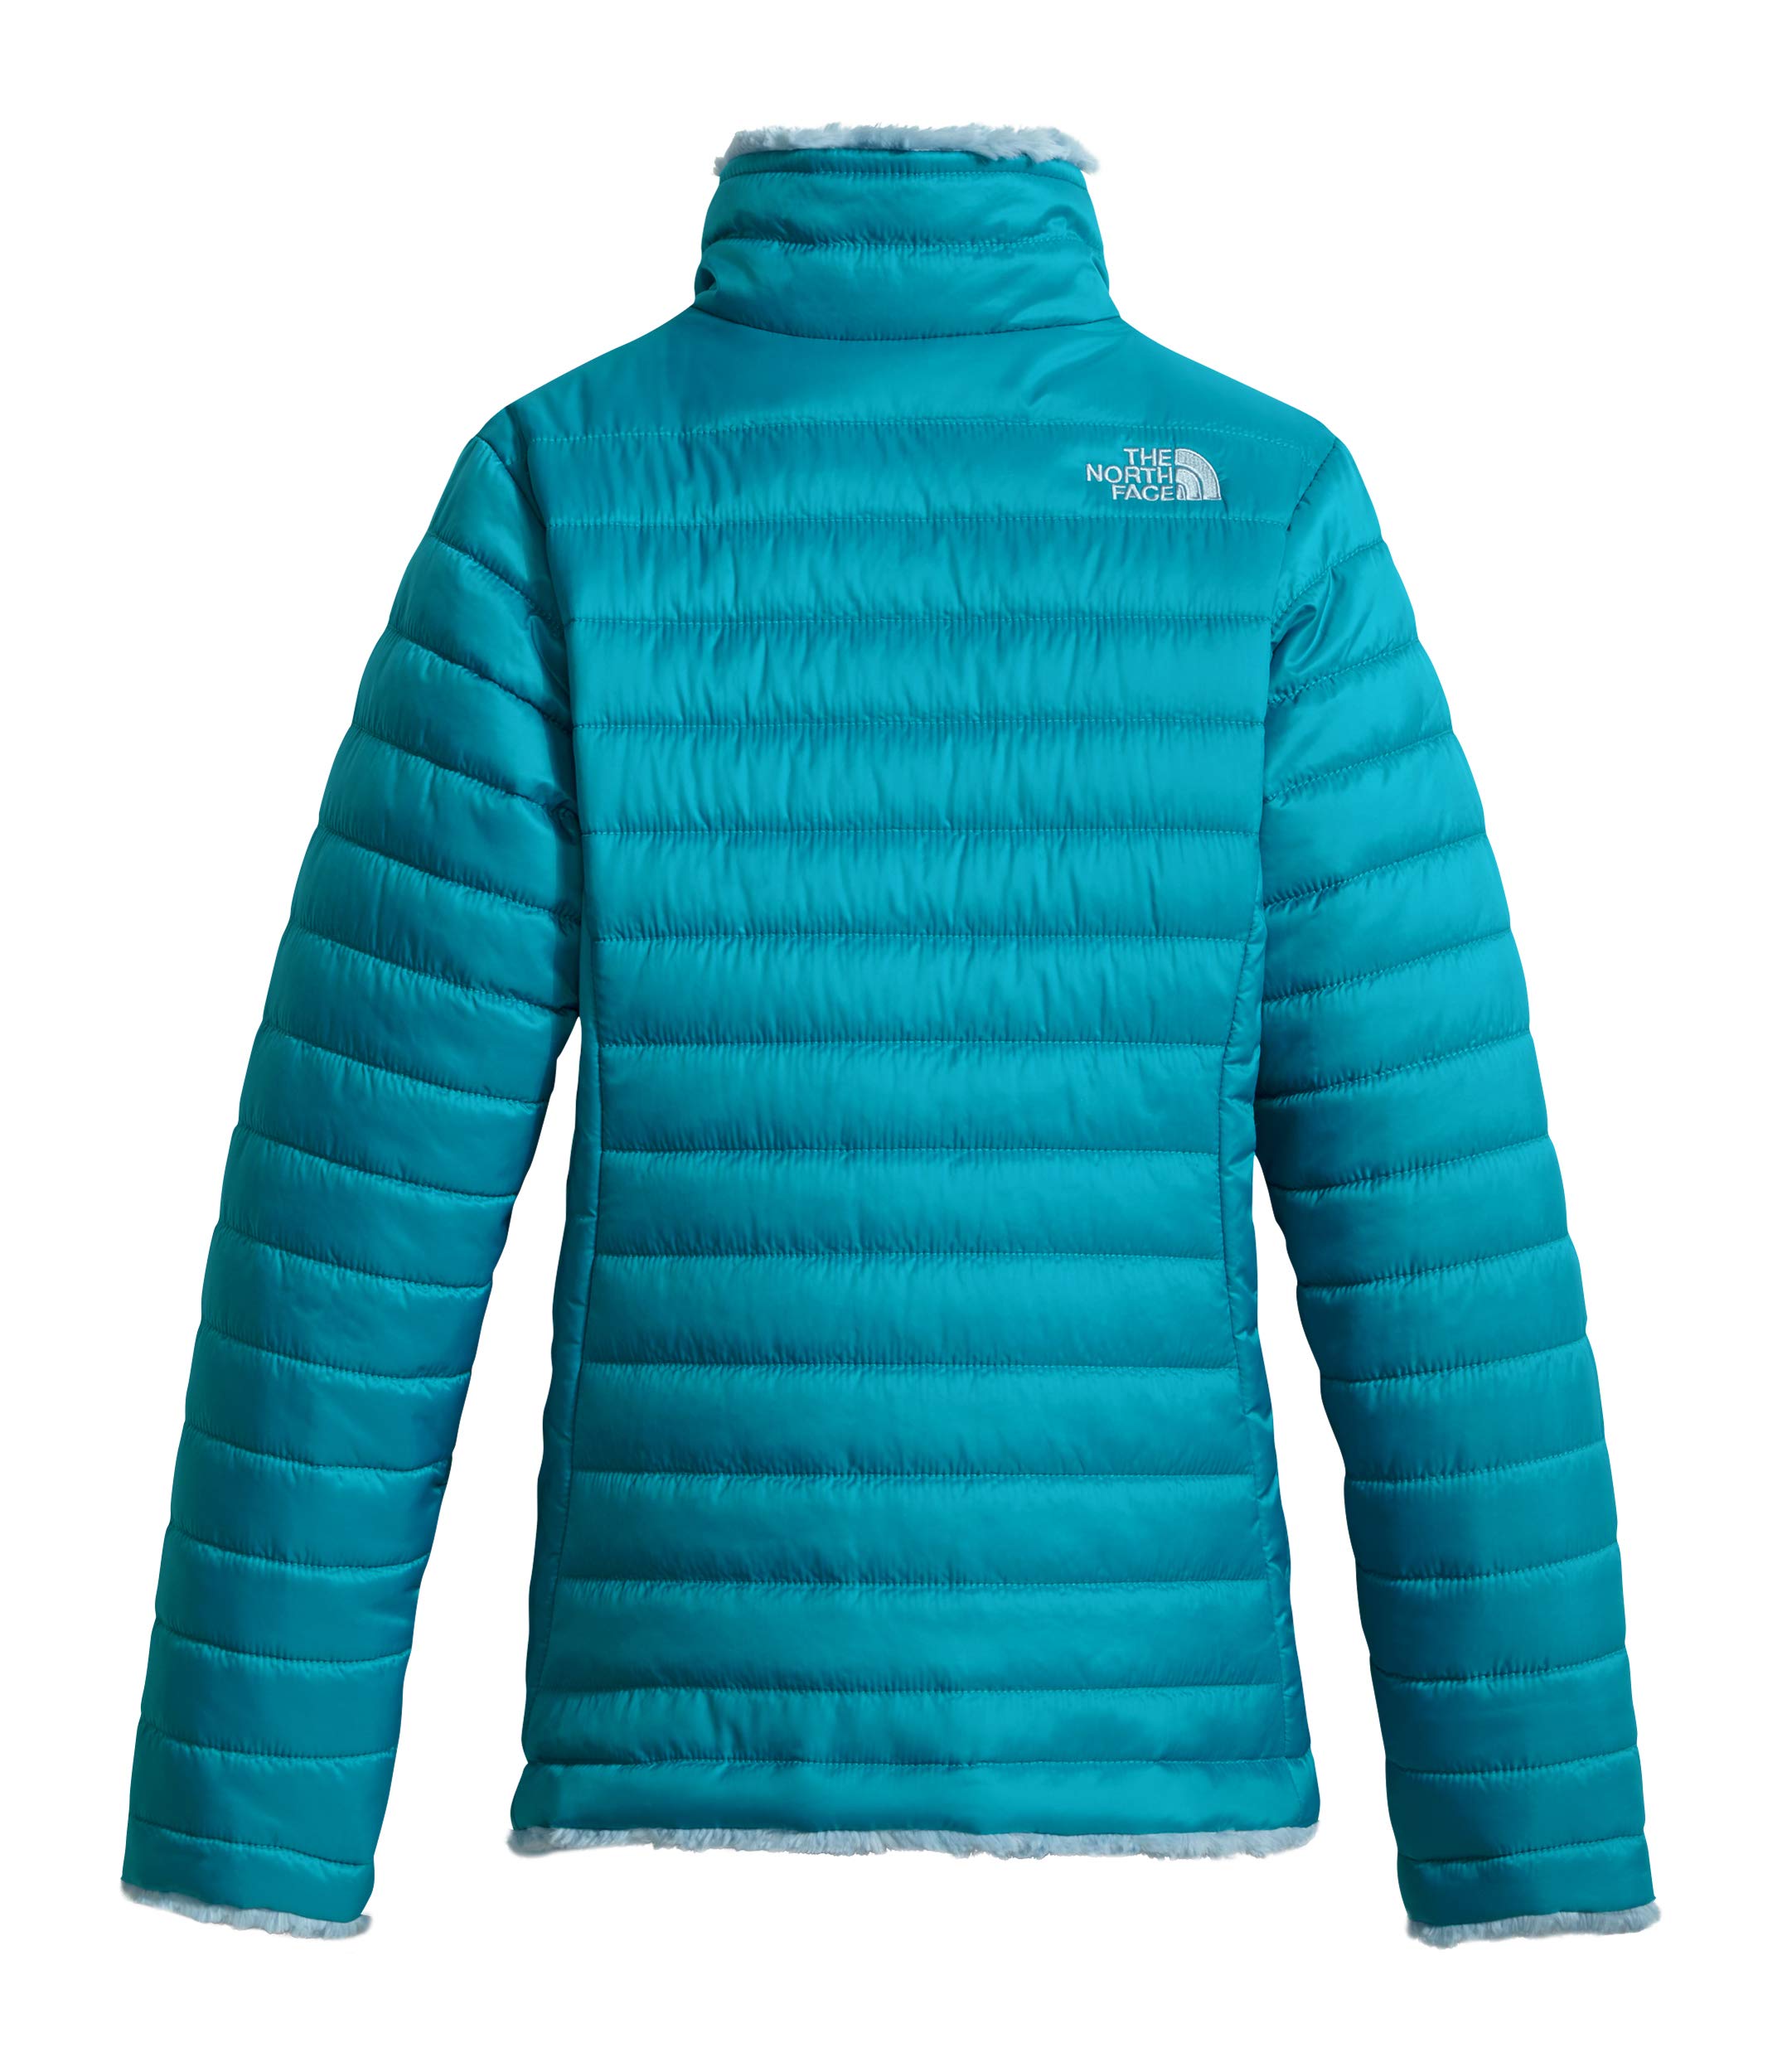 THE NORTH FACE Swirl Jacket for Girls, Girls, T0CN0179M.